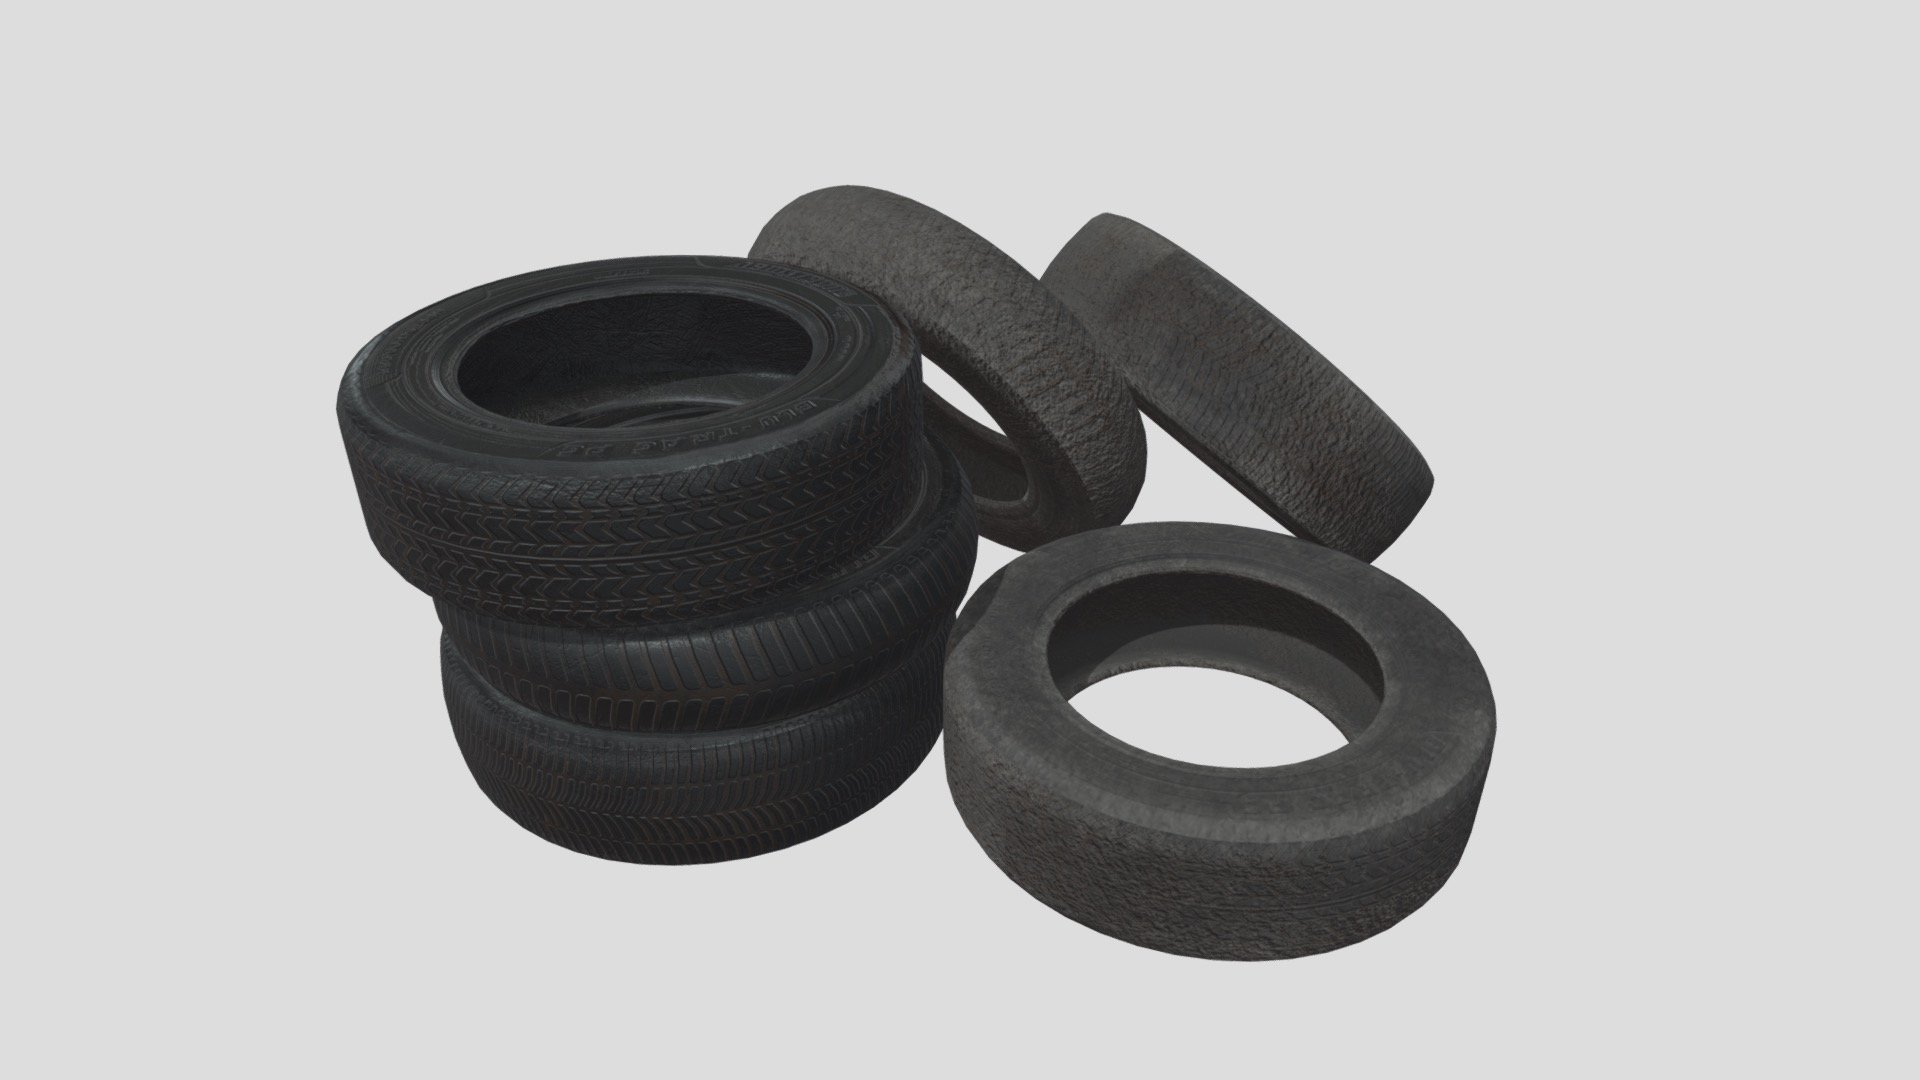 These Tires Are perfect for vehicles and as decoration in any scene. The tires come with clean and dirty version for extra variation. The models can be viewed from all angles and distances.

This includes:

The meshes (3 versions)
4K and 2K Texture Sets (Albedo, Roughness, Normal, Height)
The meshes are UV Unwrapped with vertex colors and can easily be retextured 3d model